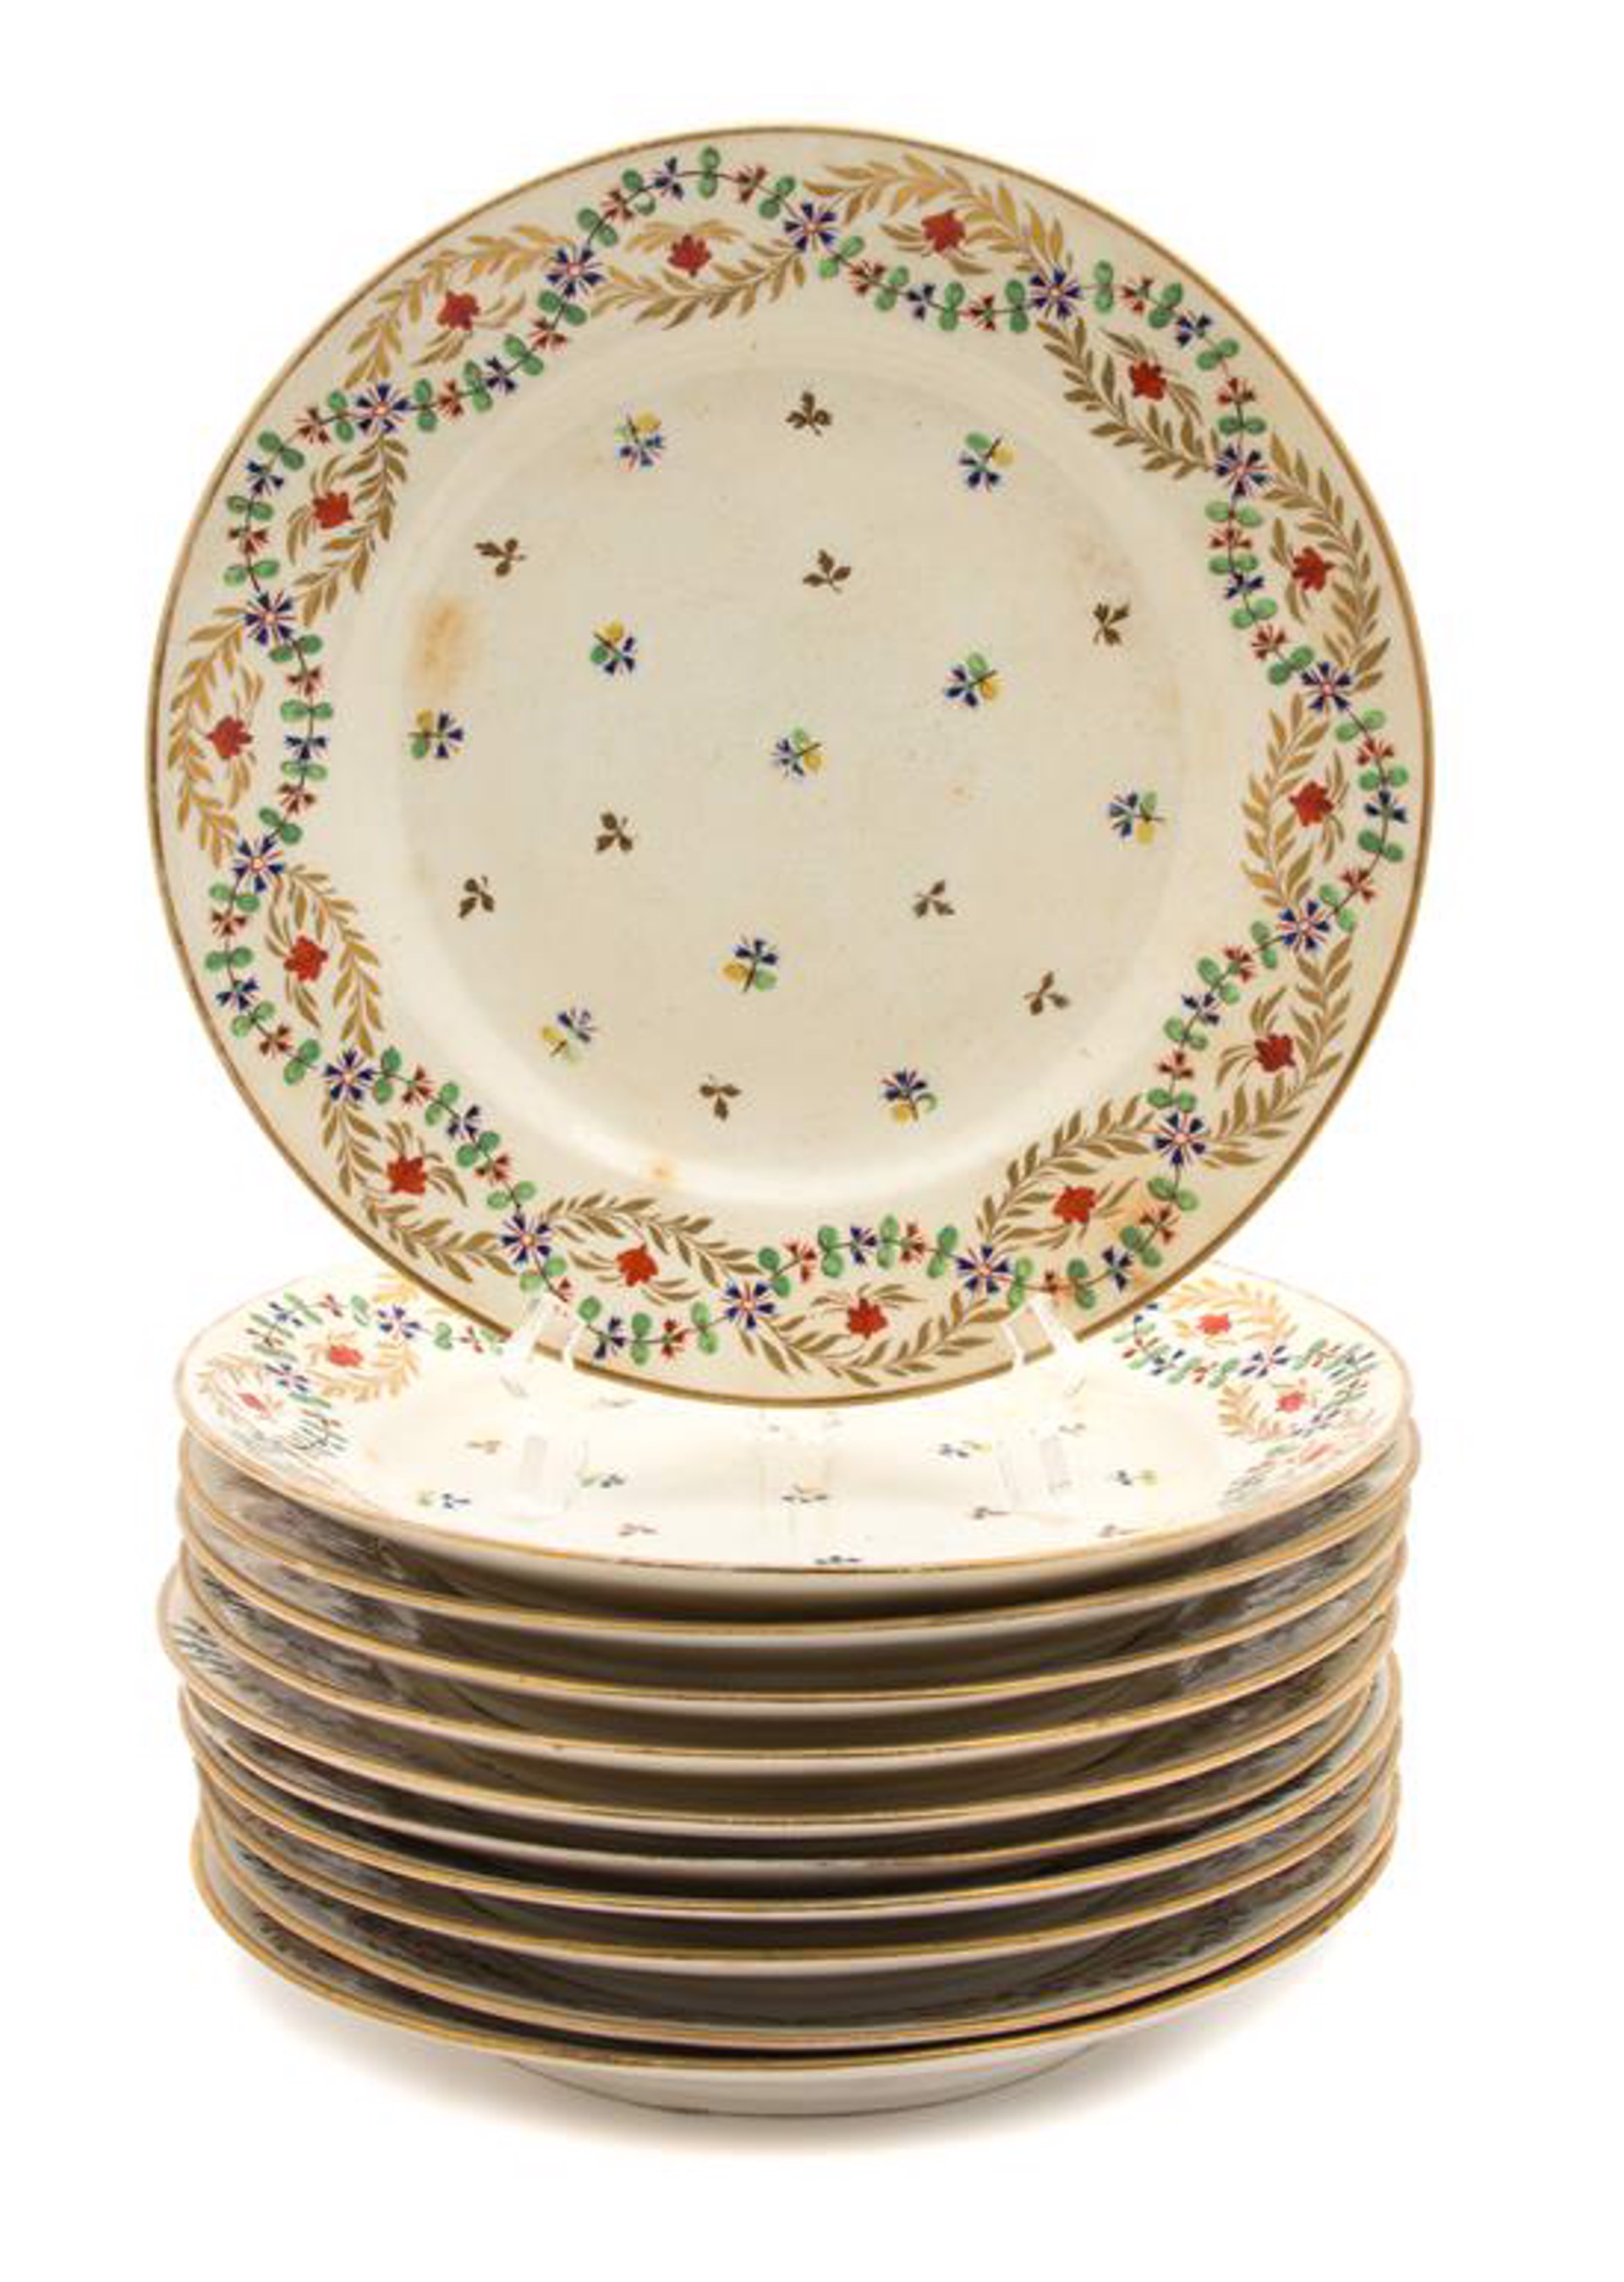 ELEVEN DERBY POLYCHROME AND GILT DECORATED PORCELAIN PLATES